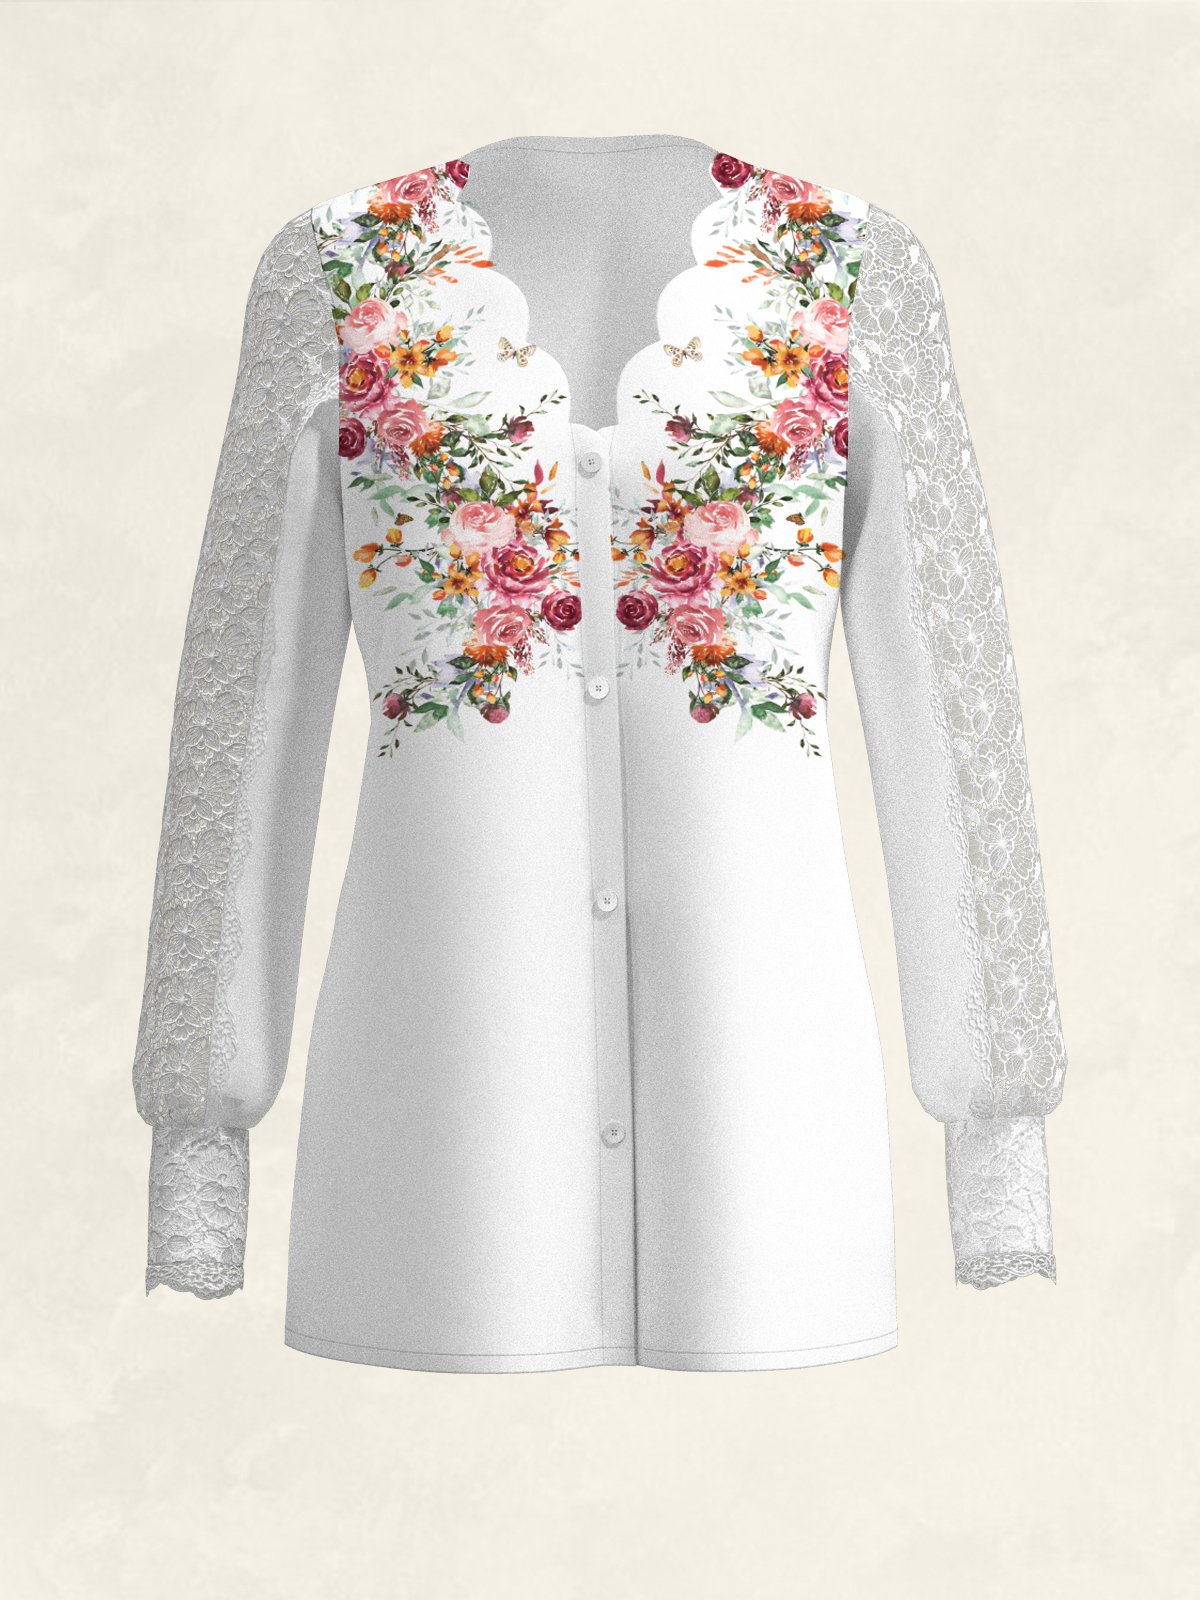 Lace Collar Long Sleeve Floral Buckle Regular Loose Blouse For Women